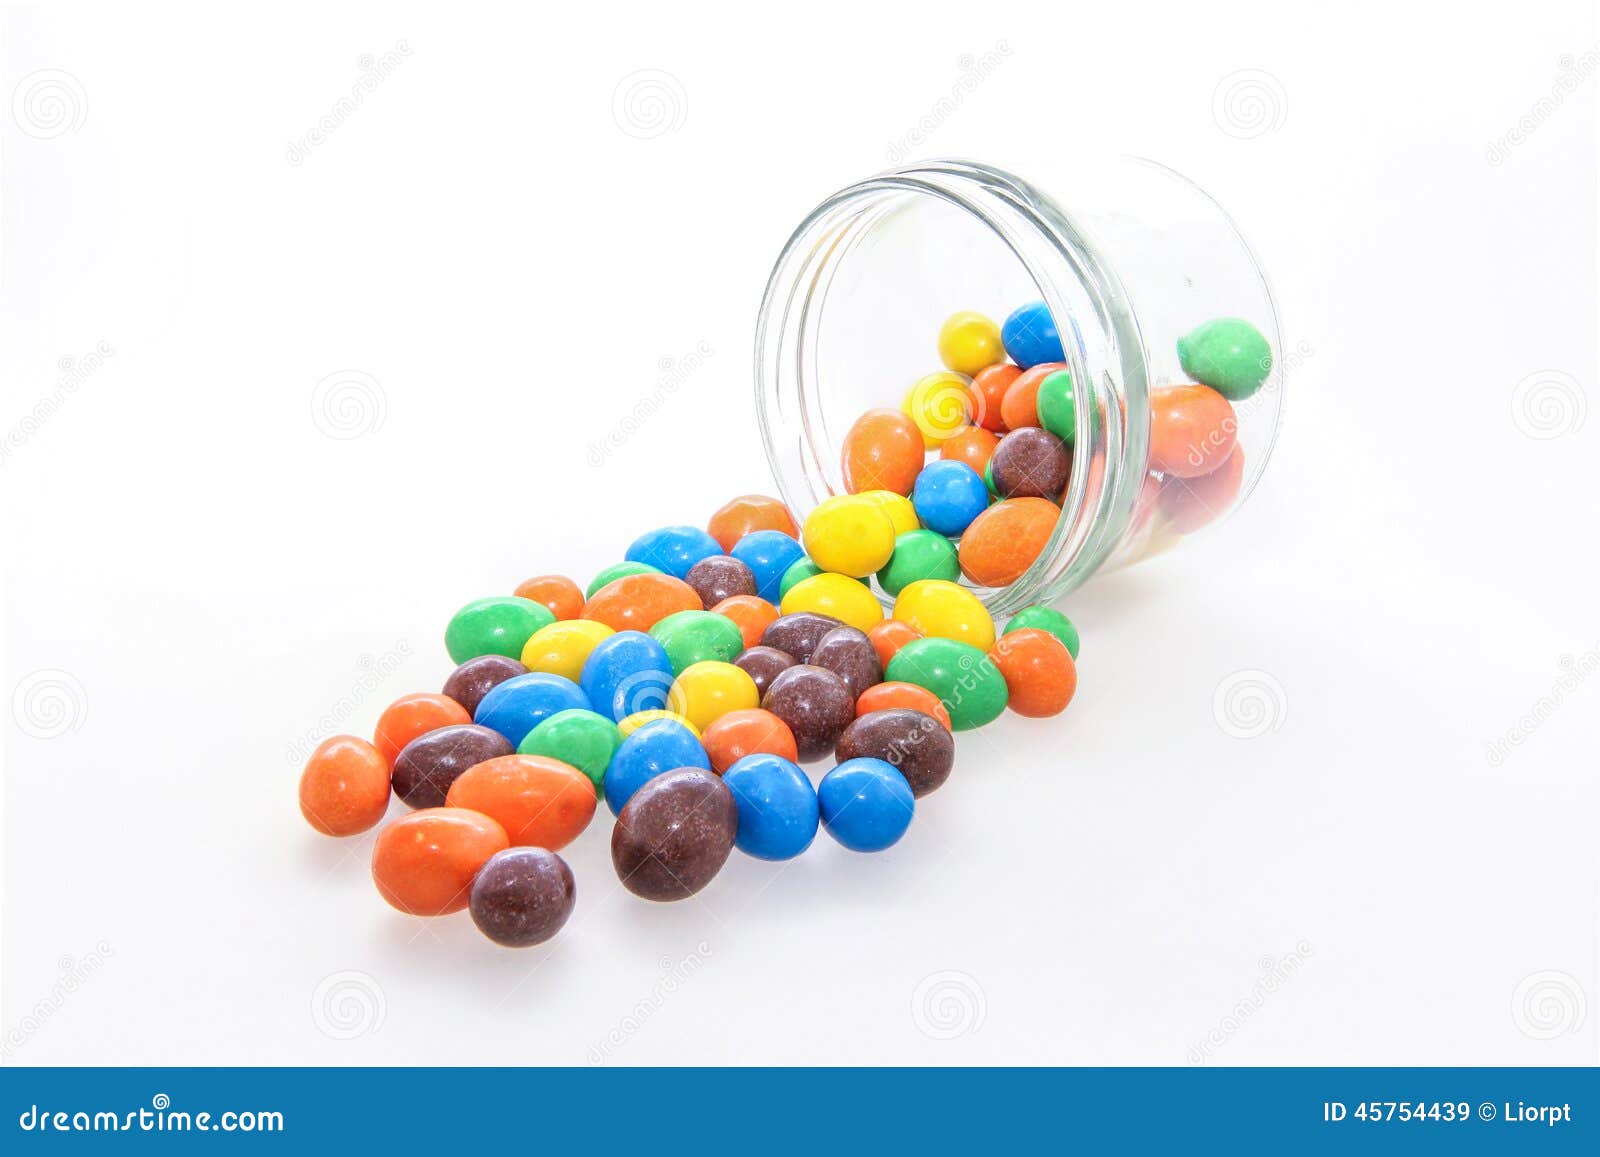 Chocolate Candy in a Glass Jar Stock Image - Image of color, candies ...